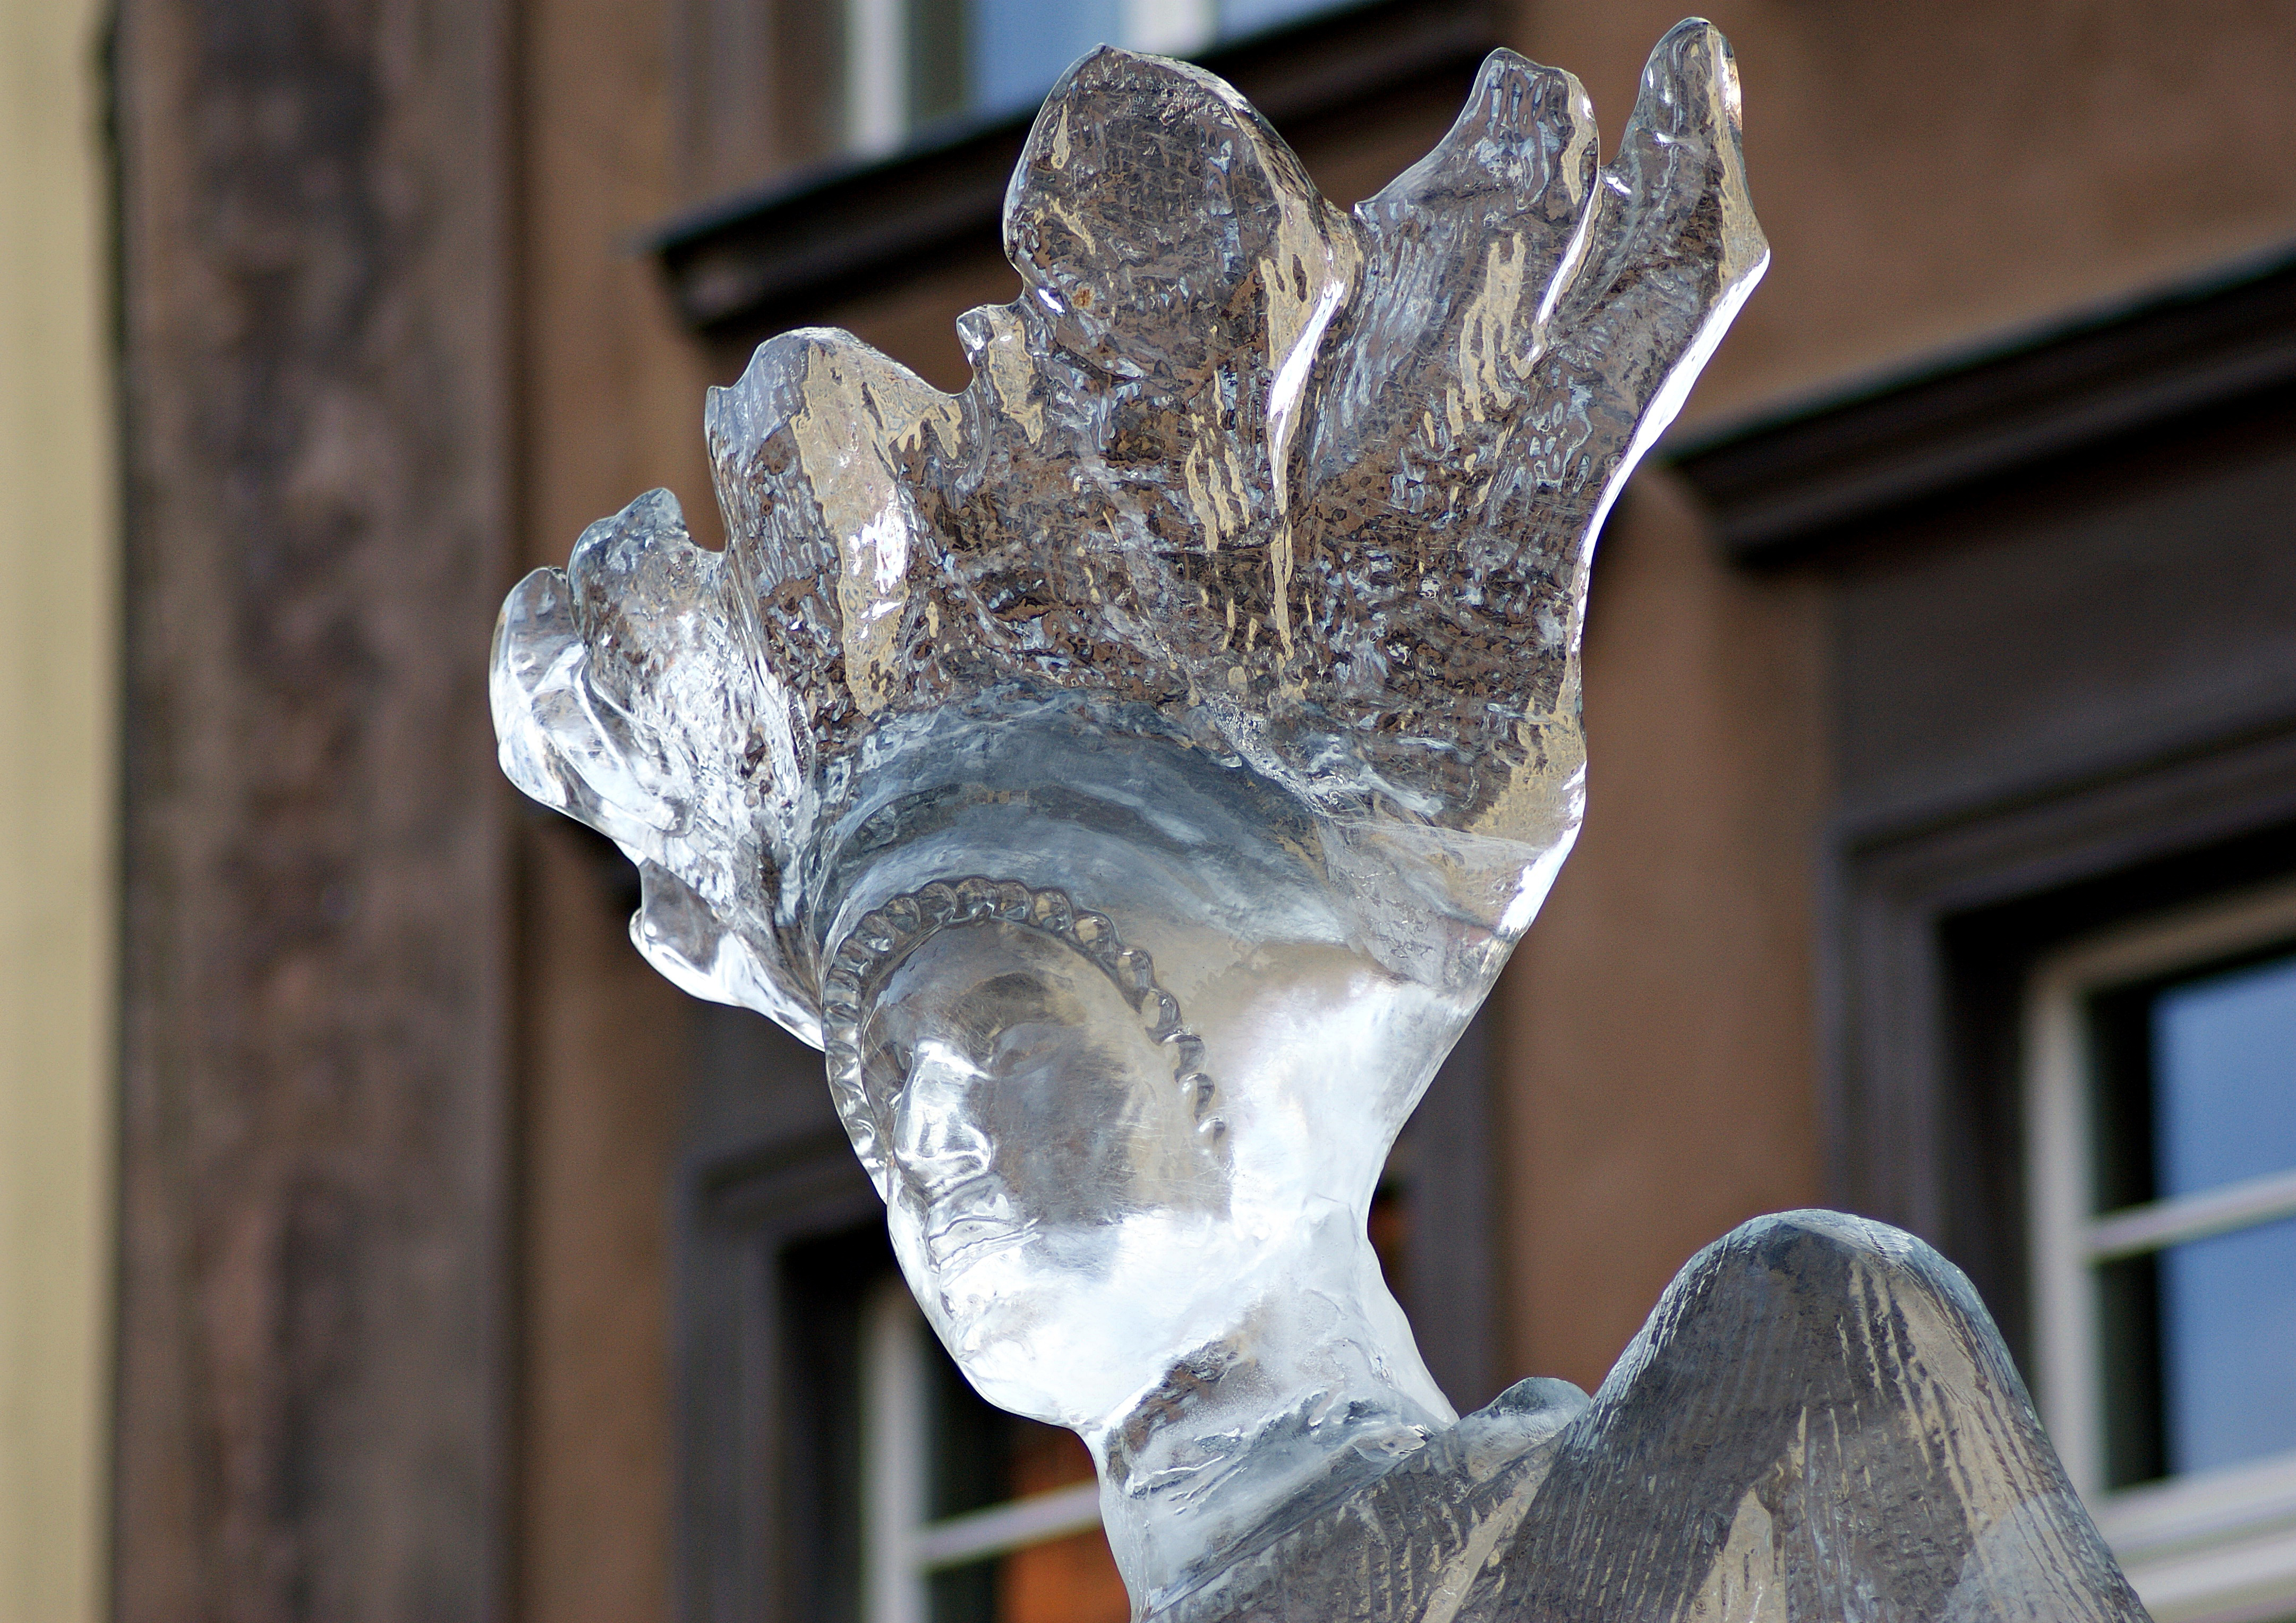 Famous Poznań Ice Festival hosting competitions of ice sculpture carving